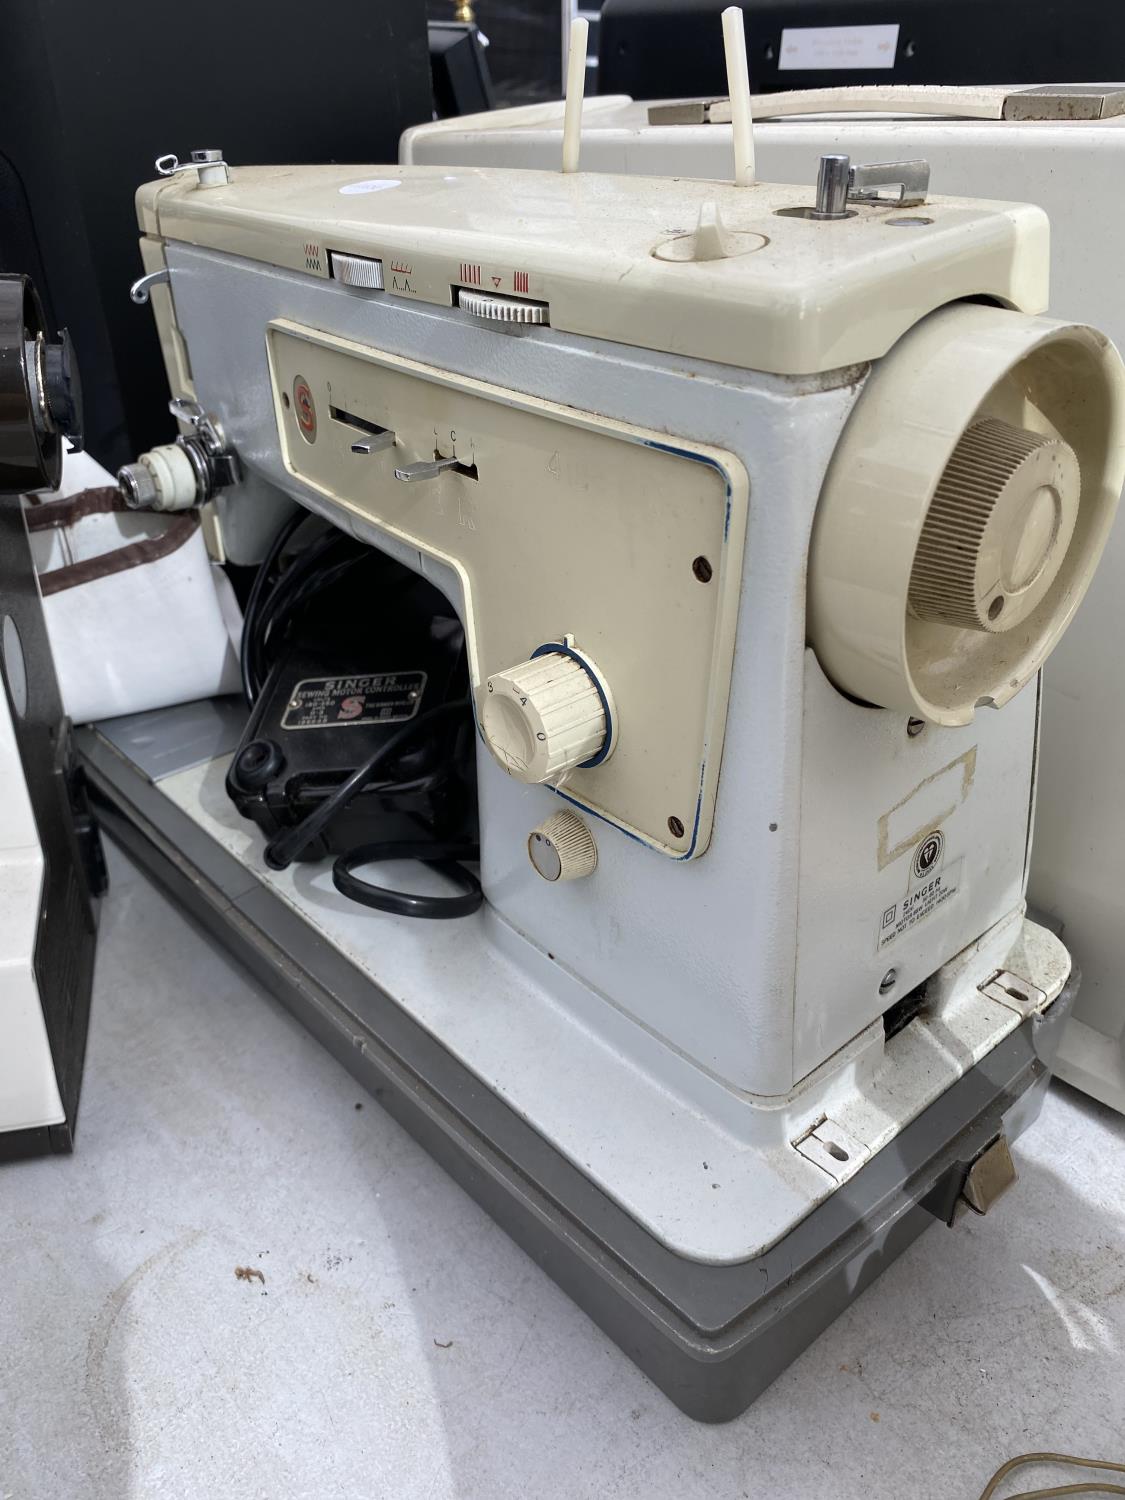 A RETRO TOYOTA SEWING MACHINE AND FURTHER RETRO SINGER SEWING MACHINE WITH FOOT PEDAL - Image 3 of 3